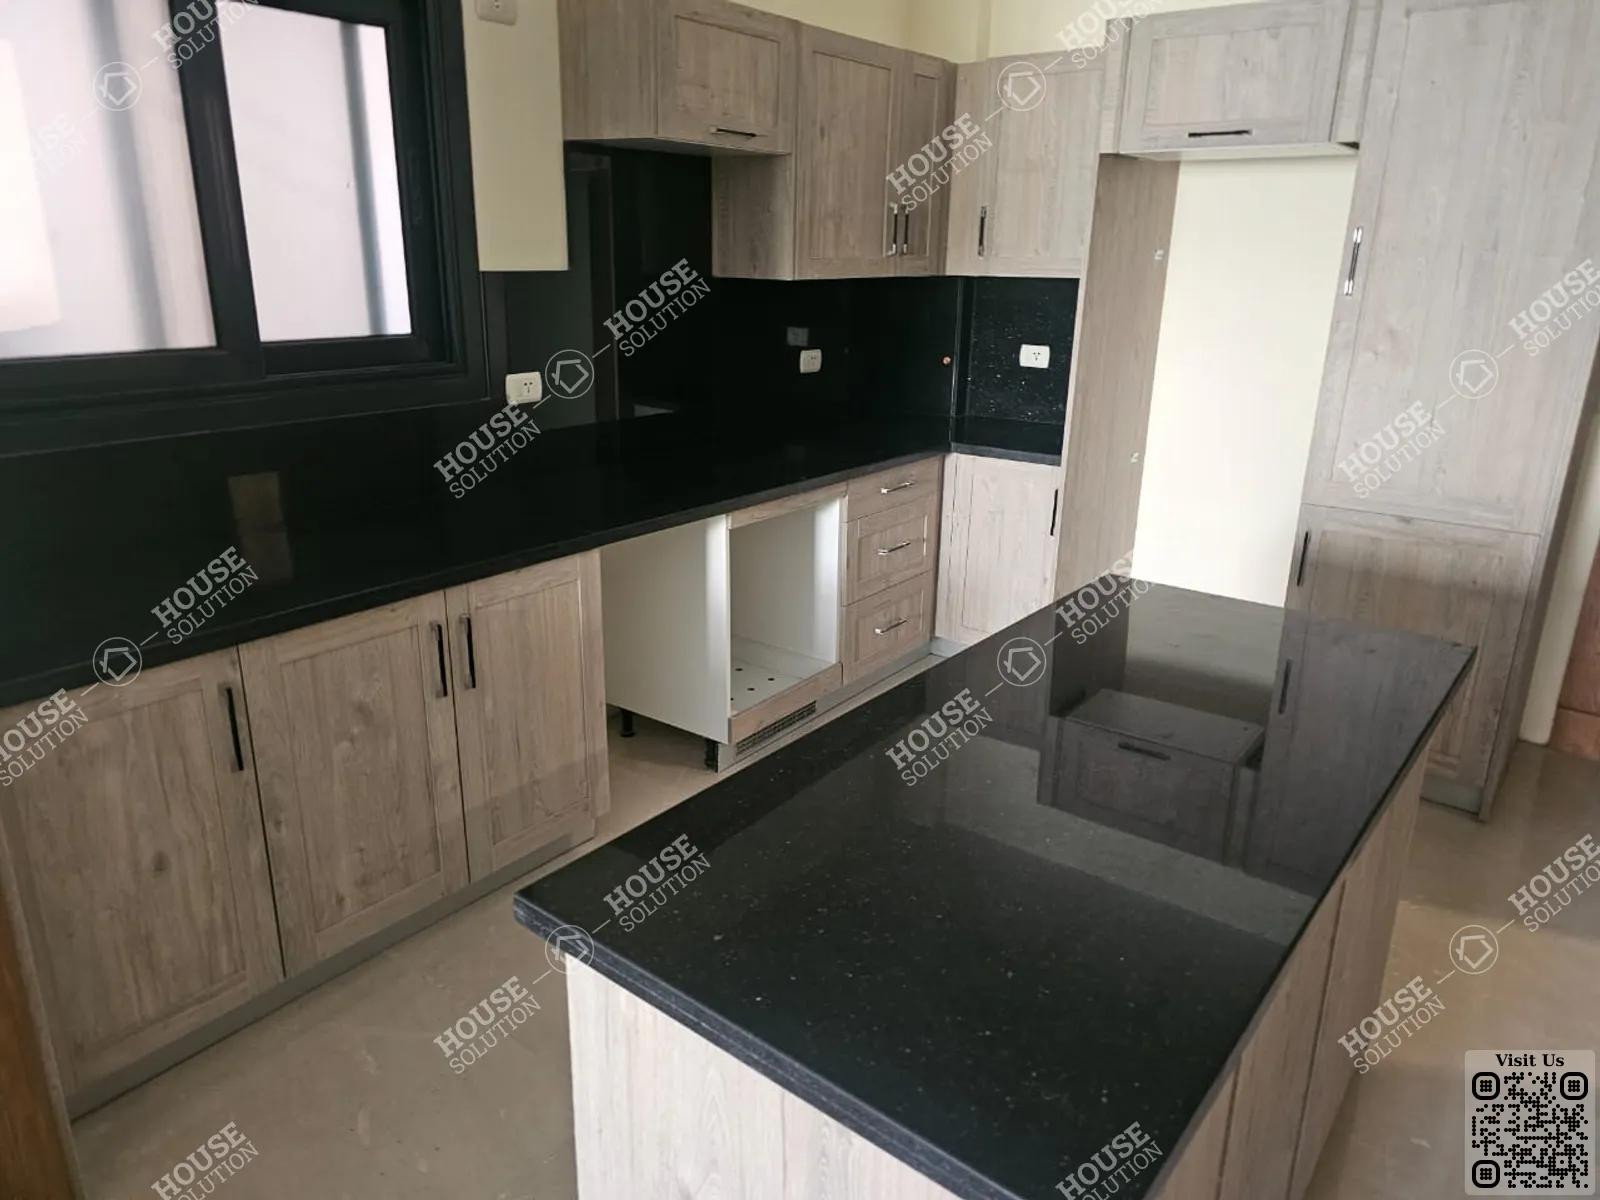 KITCHEN  @ Apartments For Rent In Maadi Maadi Sarayat Area: 125 m² consists of 2 Bedrooms 3 Bathrooms Modern furnished 5 stars #5914-1